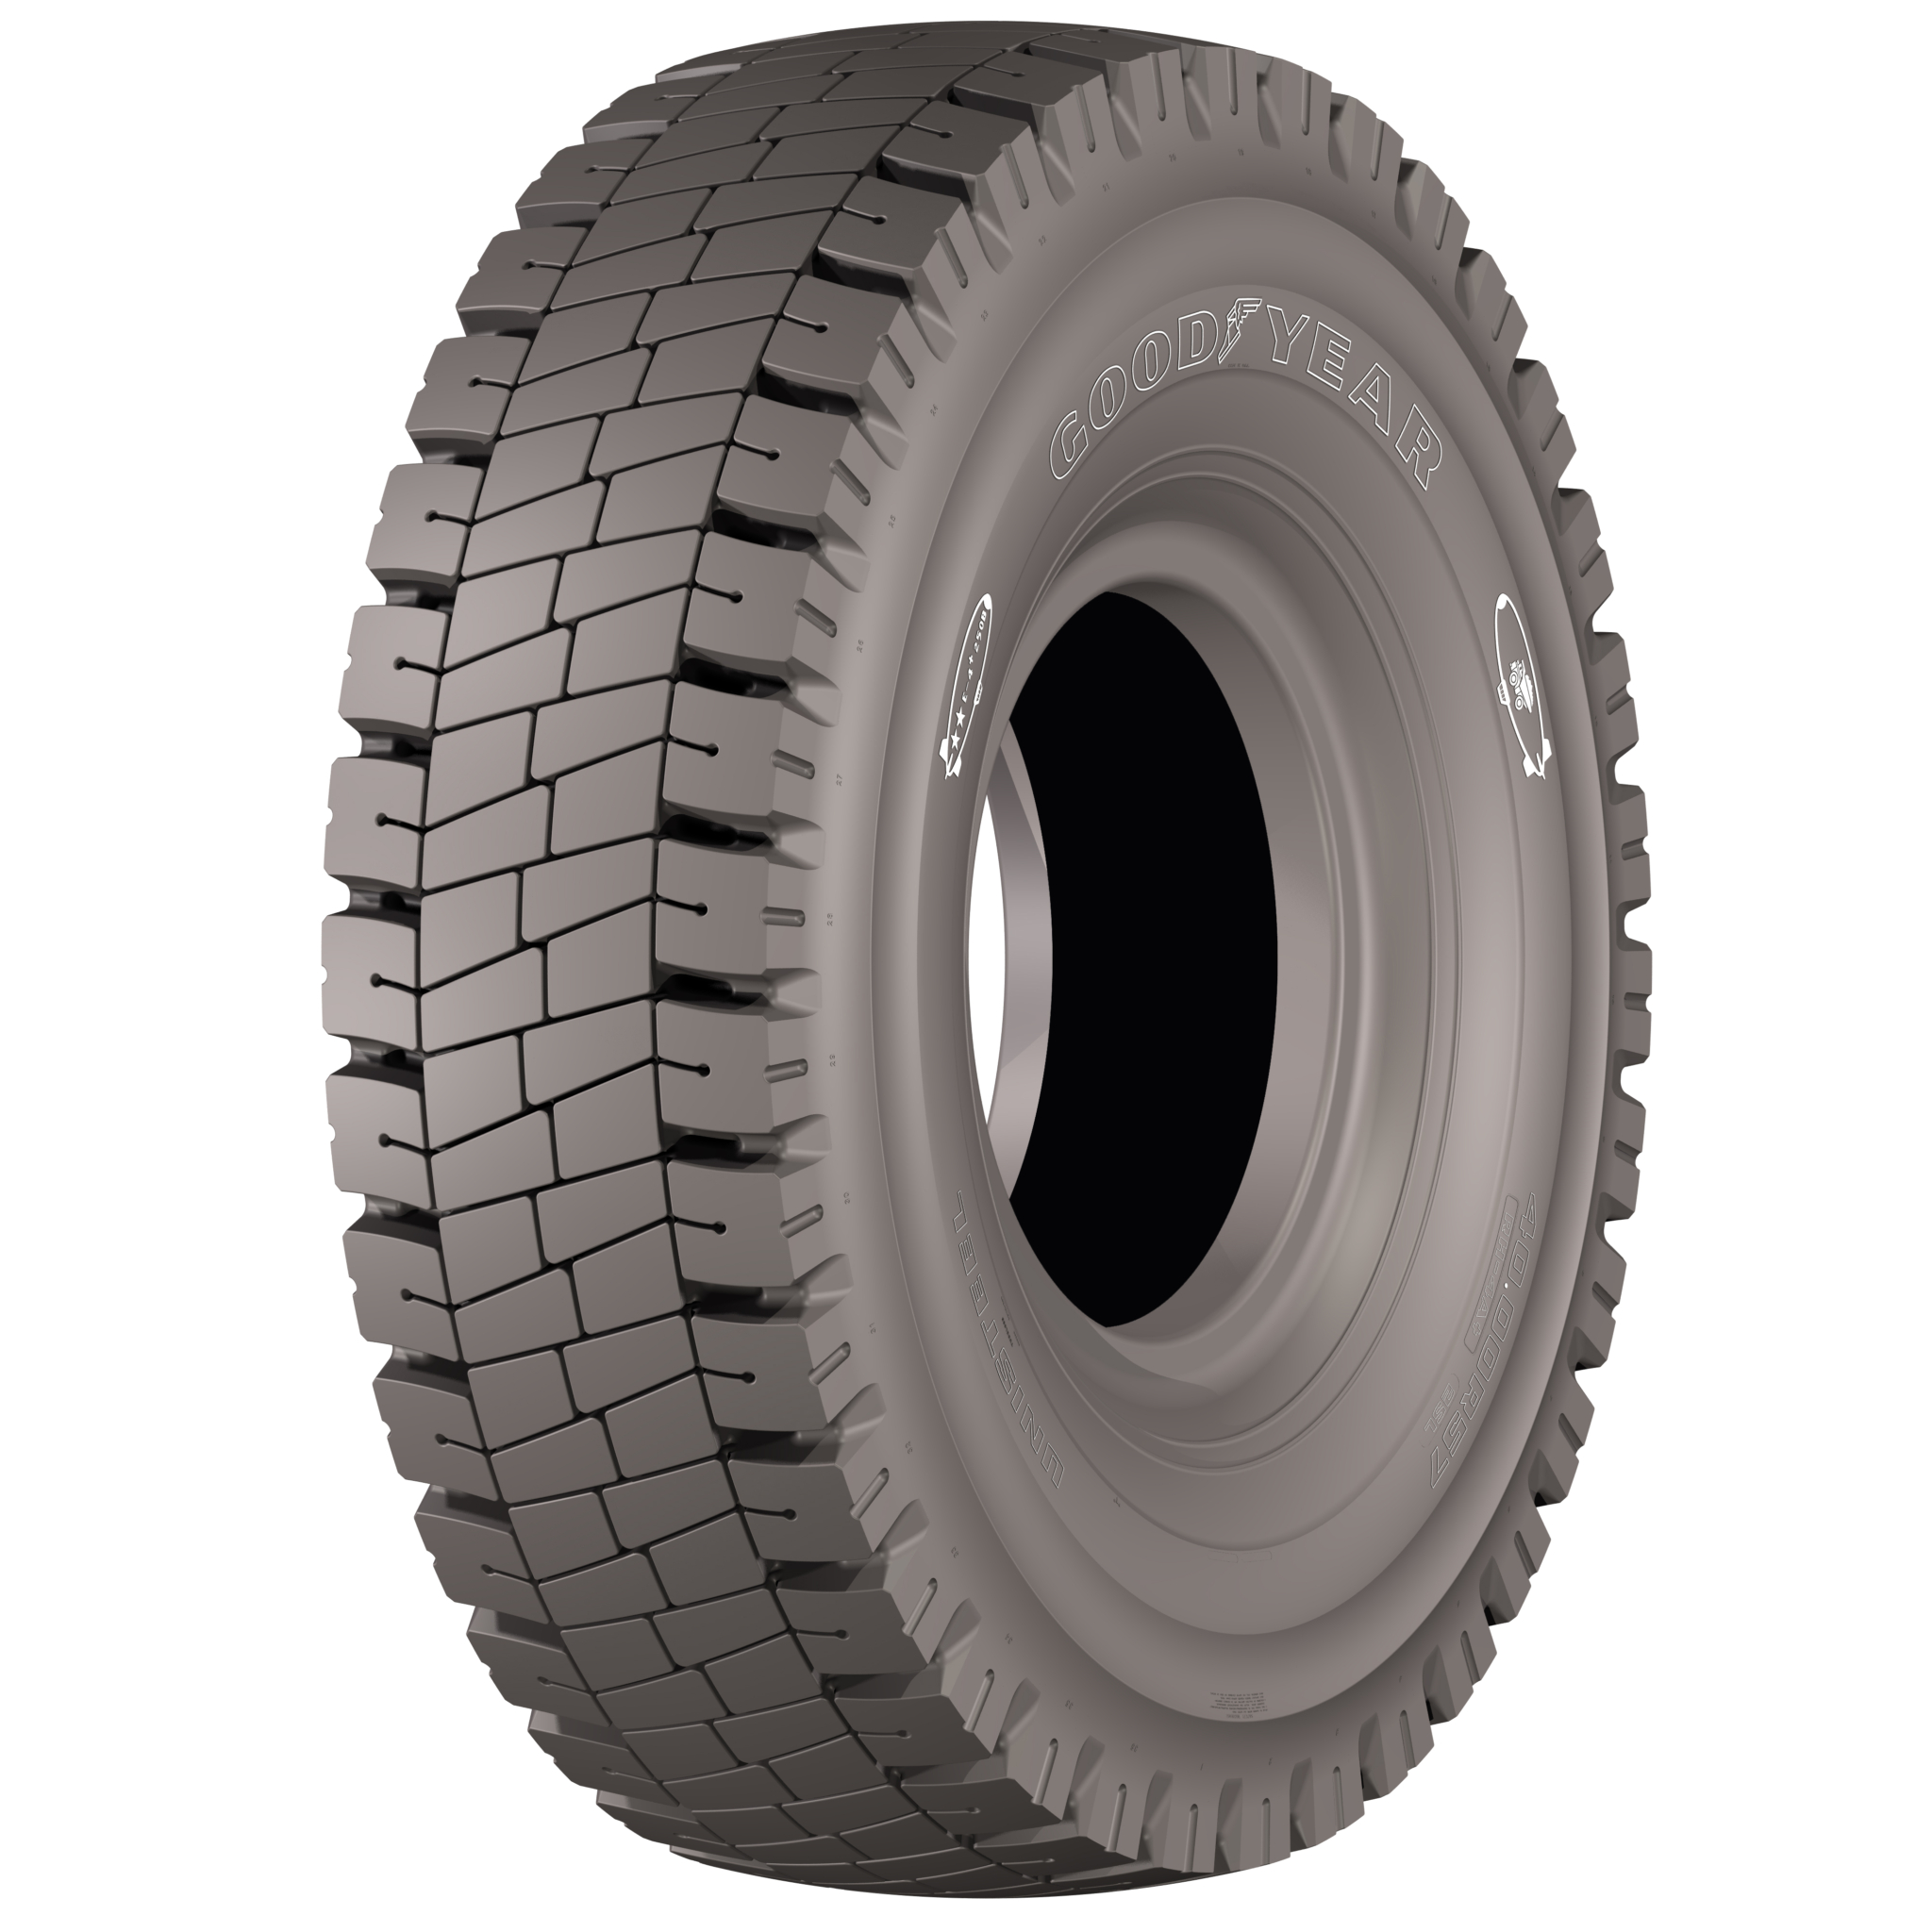 Goodyear launches RH-4A+ off-highway tyre